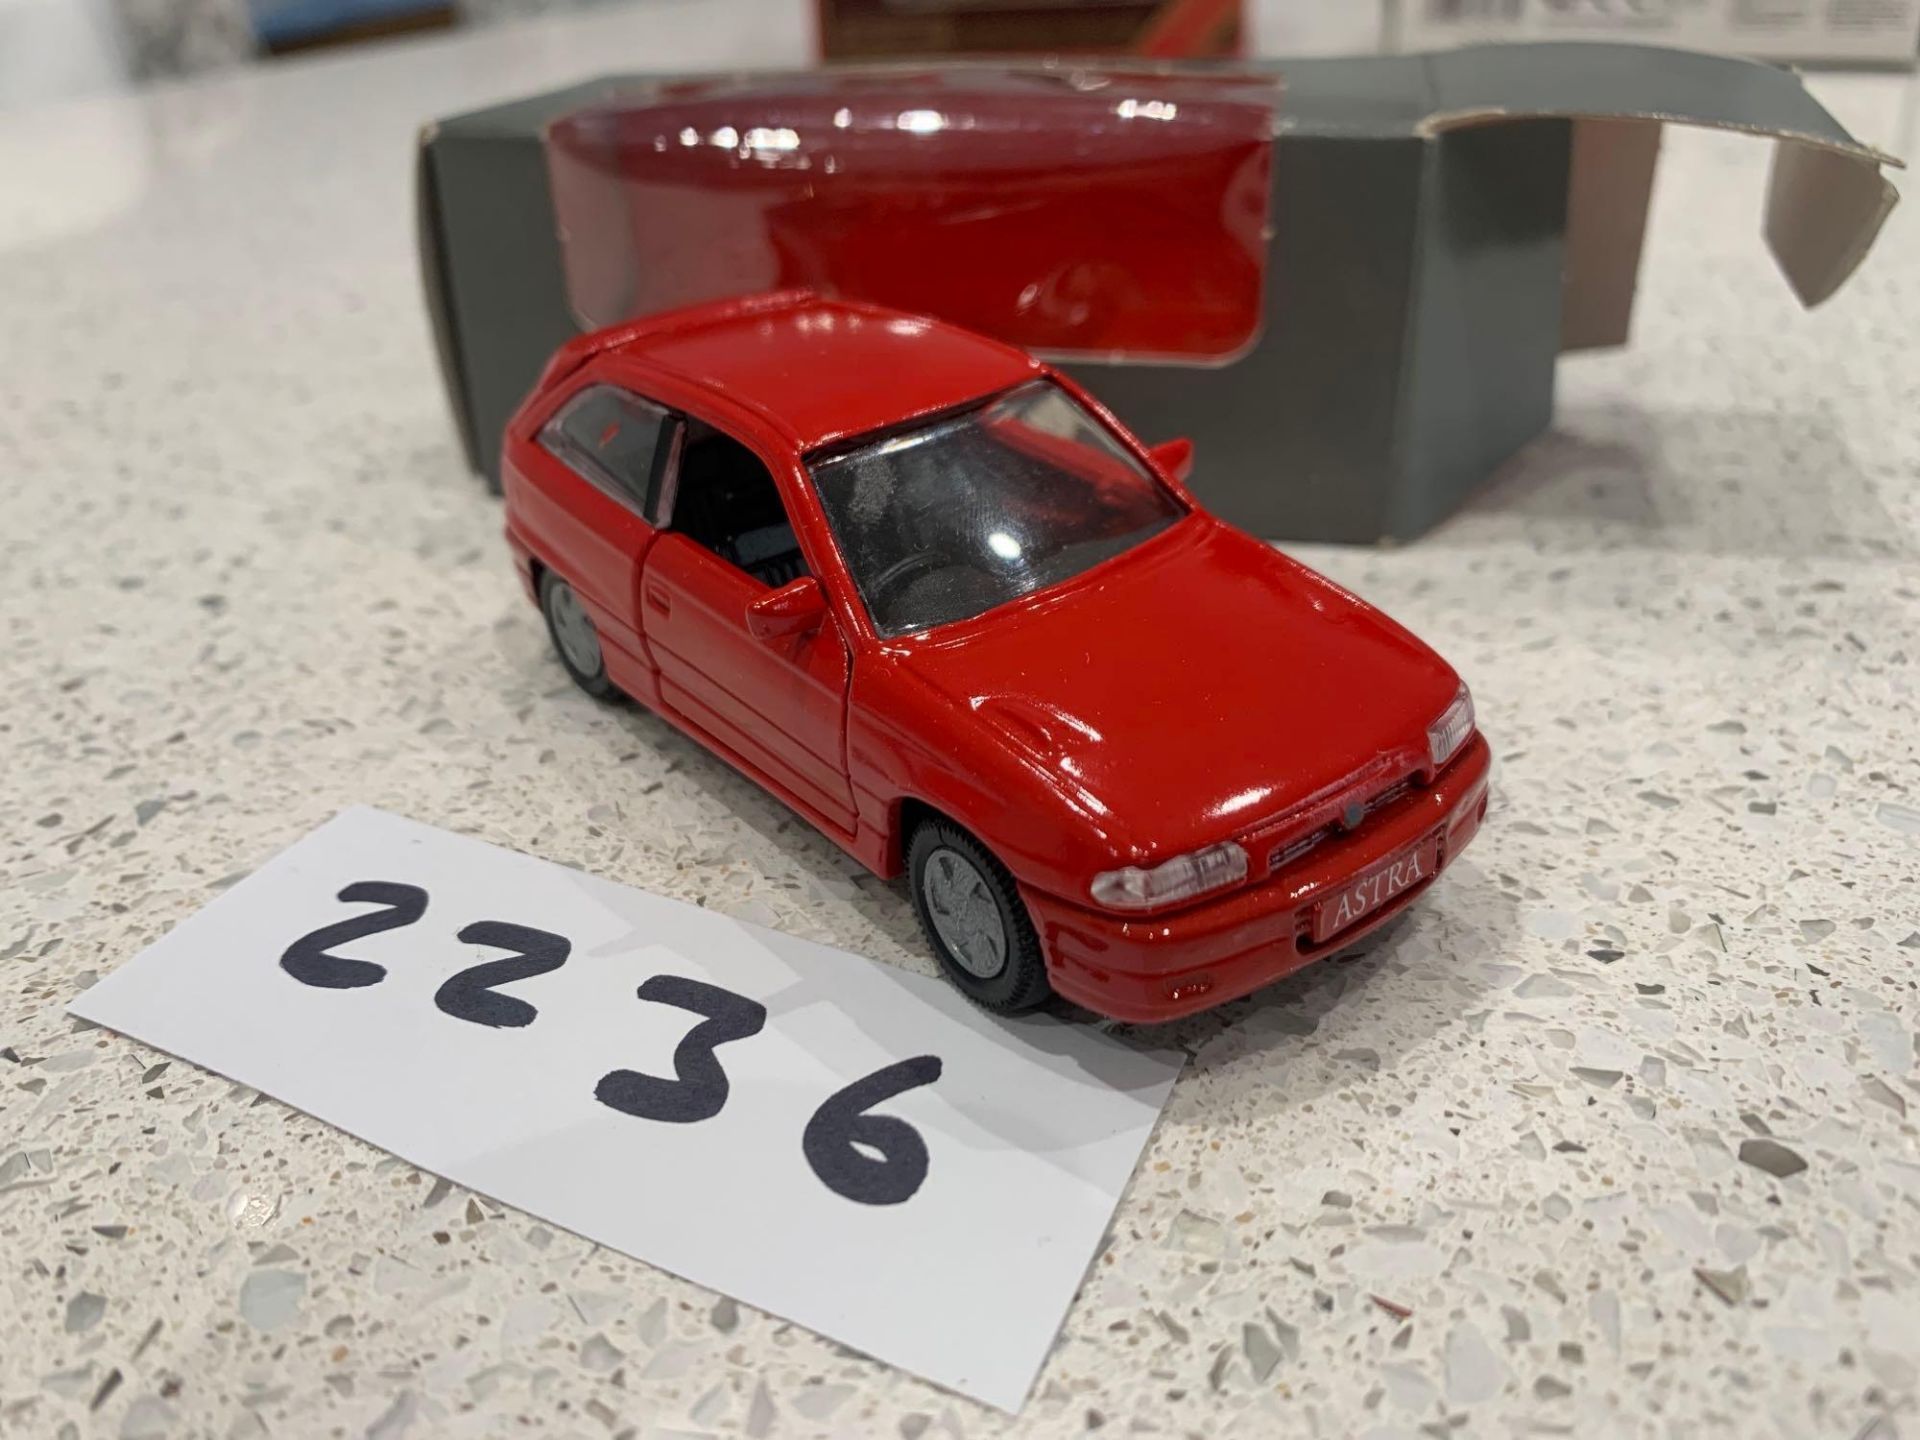 Gama Vauxhall Astra boxed 1:43 scale Dealers Model Red Made In Germany - Image 4 of 4